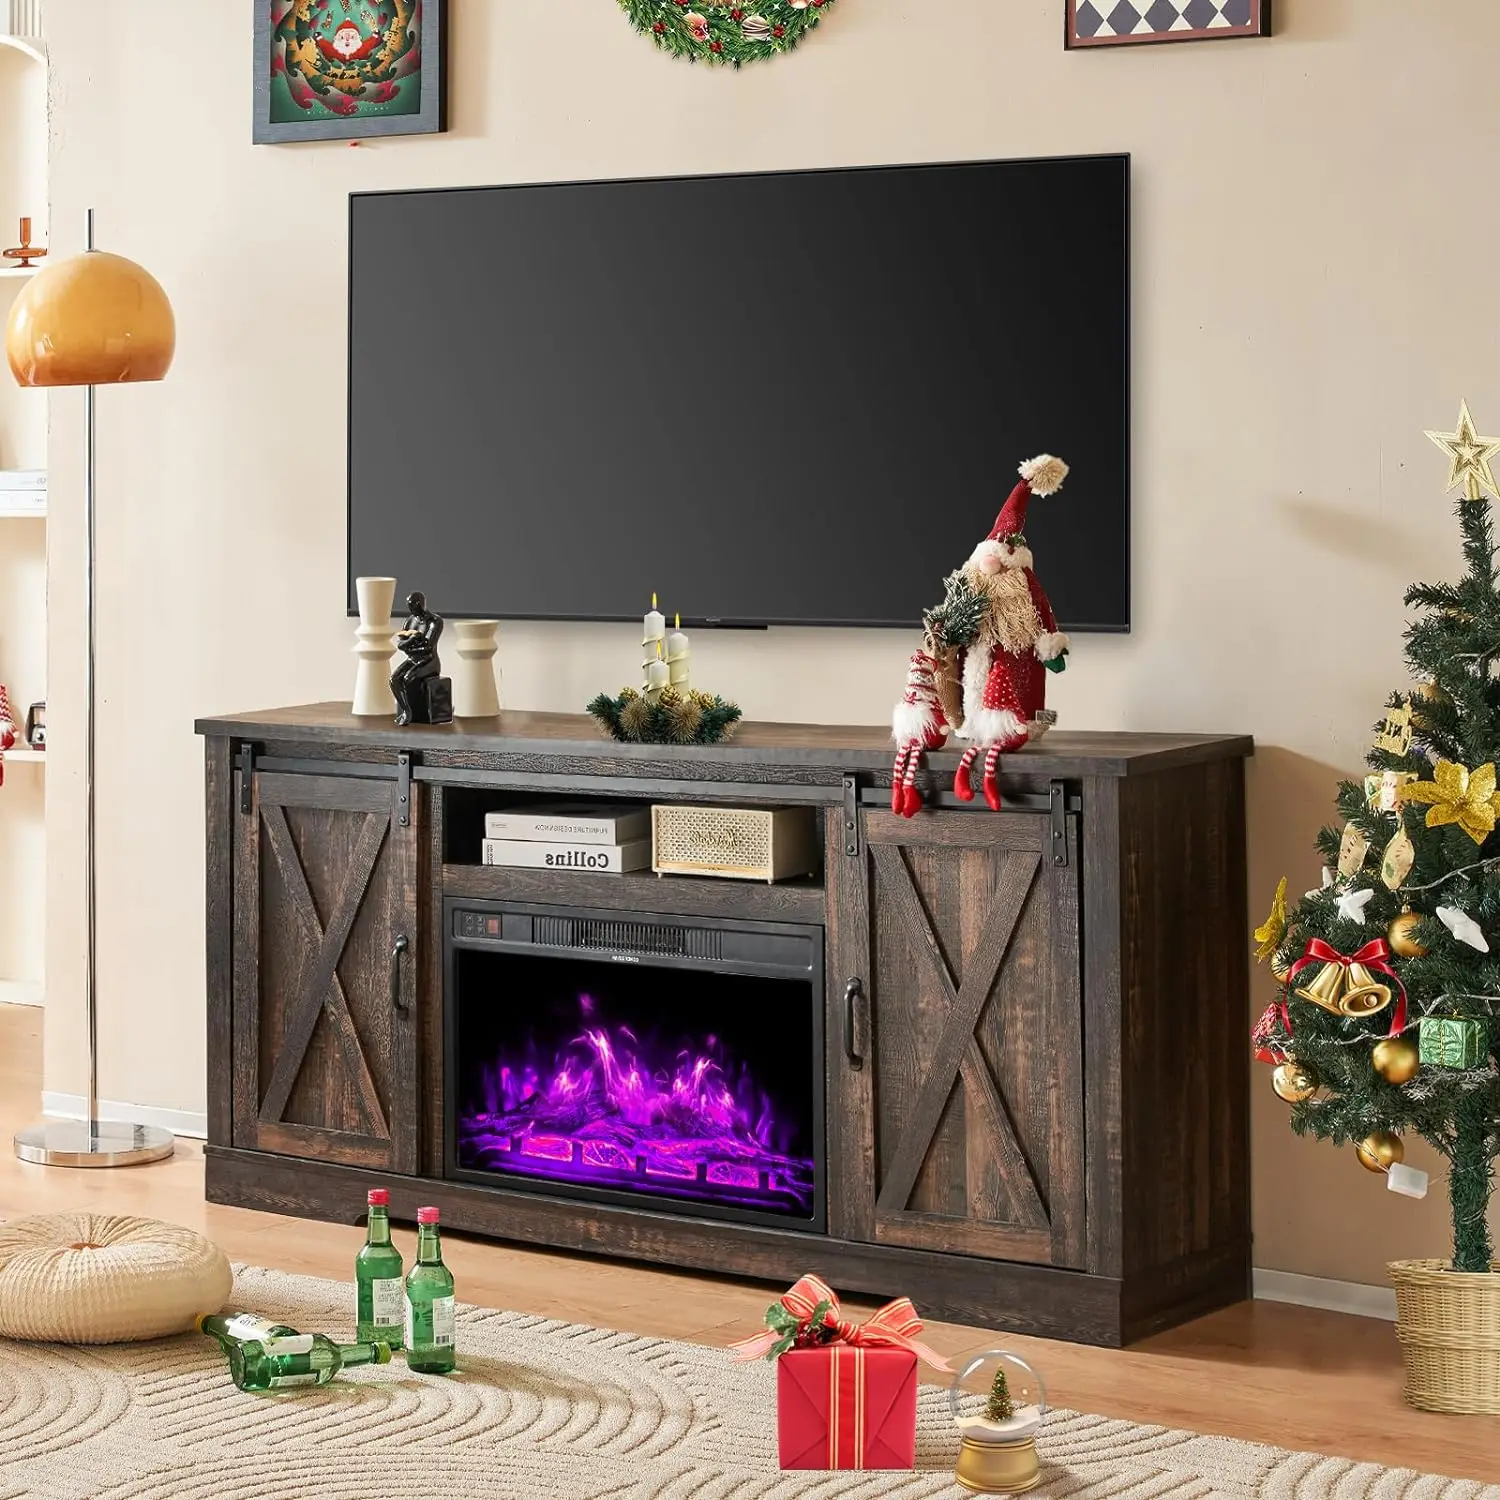 

Fireplace TV Stand Sliding Barn Door, Entertainment Center with Electric Fireplace Insert, Storage Cabinets, Adjustable Shelves